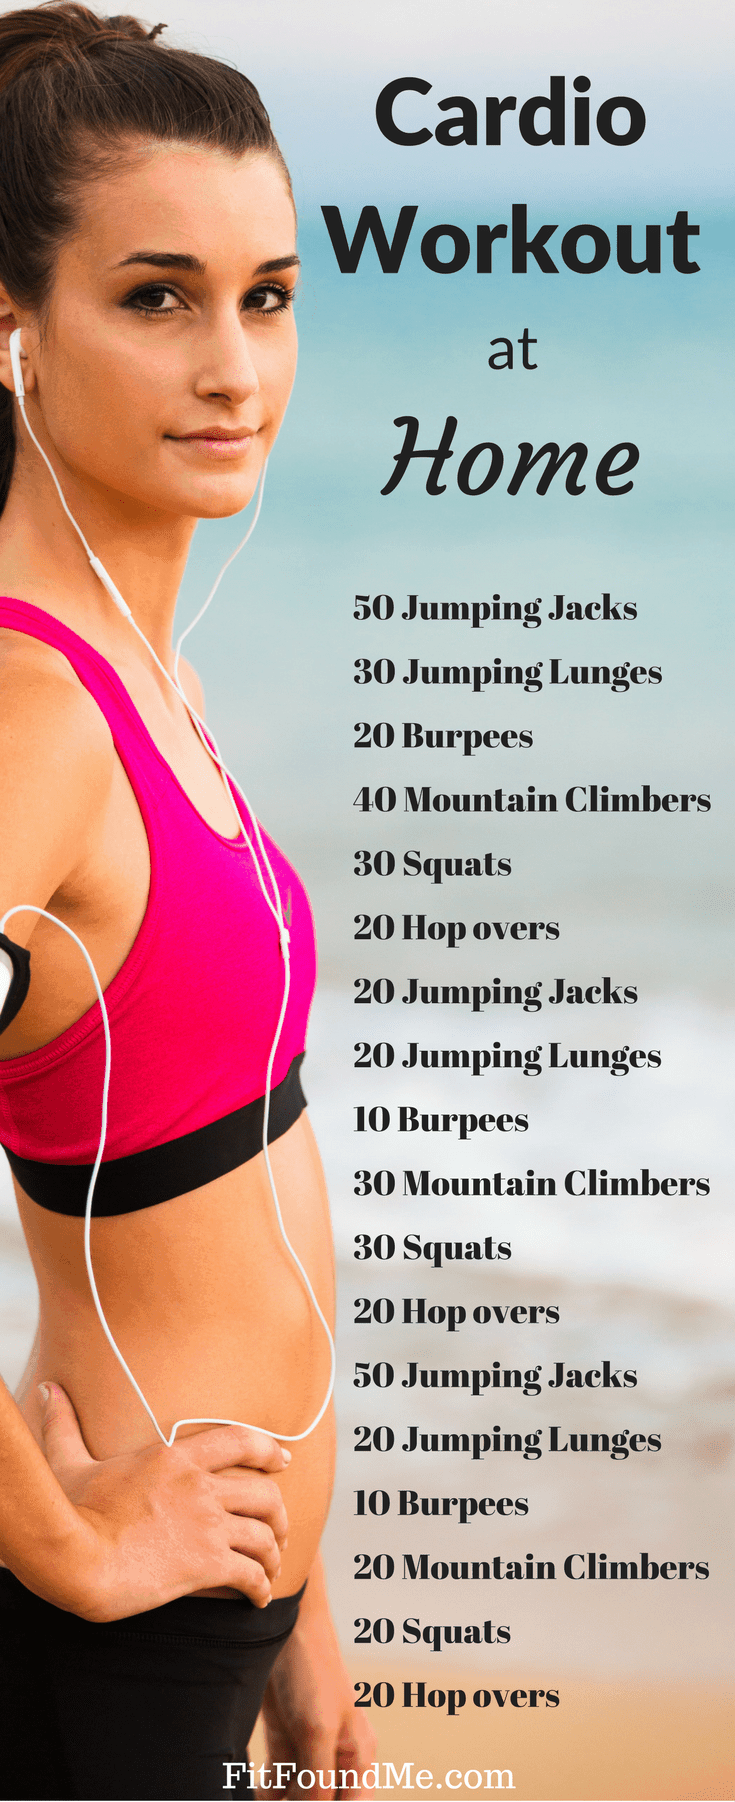 cardio workout at home